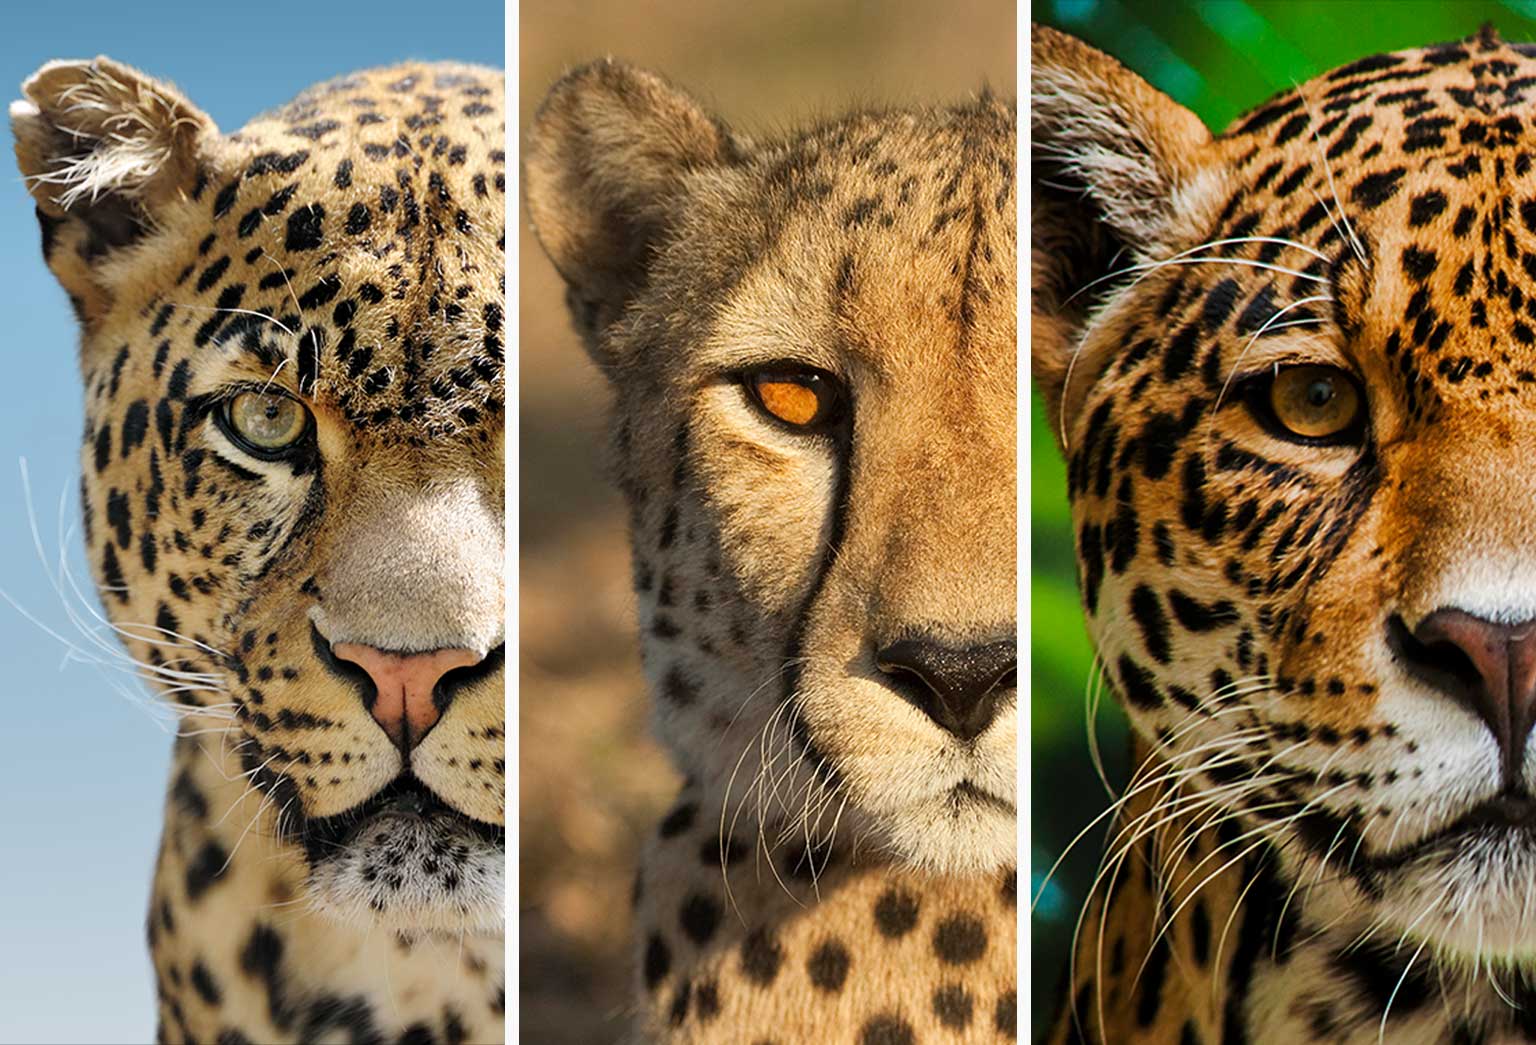 What’s the difference between Jaguars, leopards, and cheetahs?